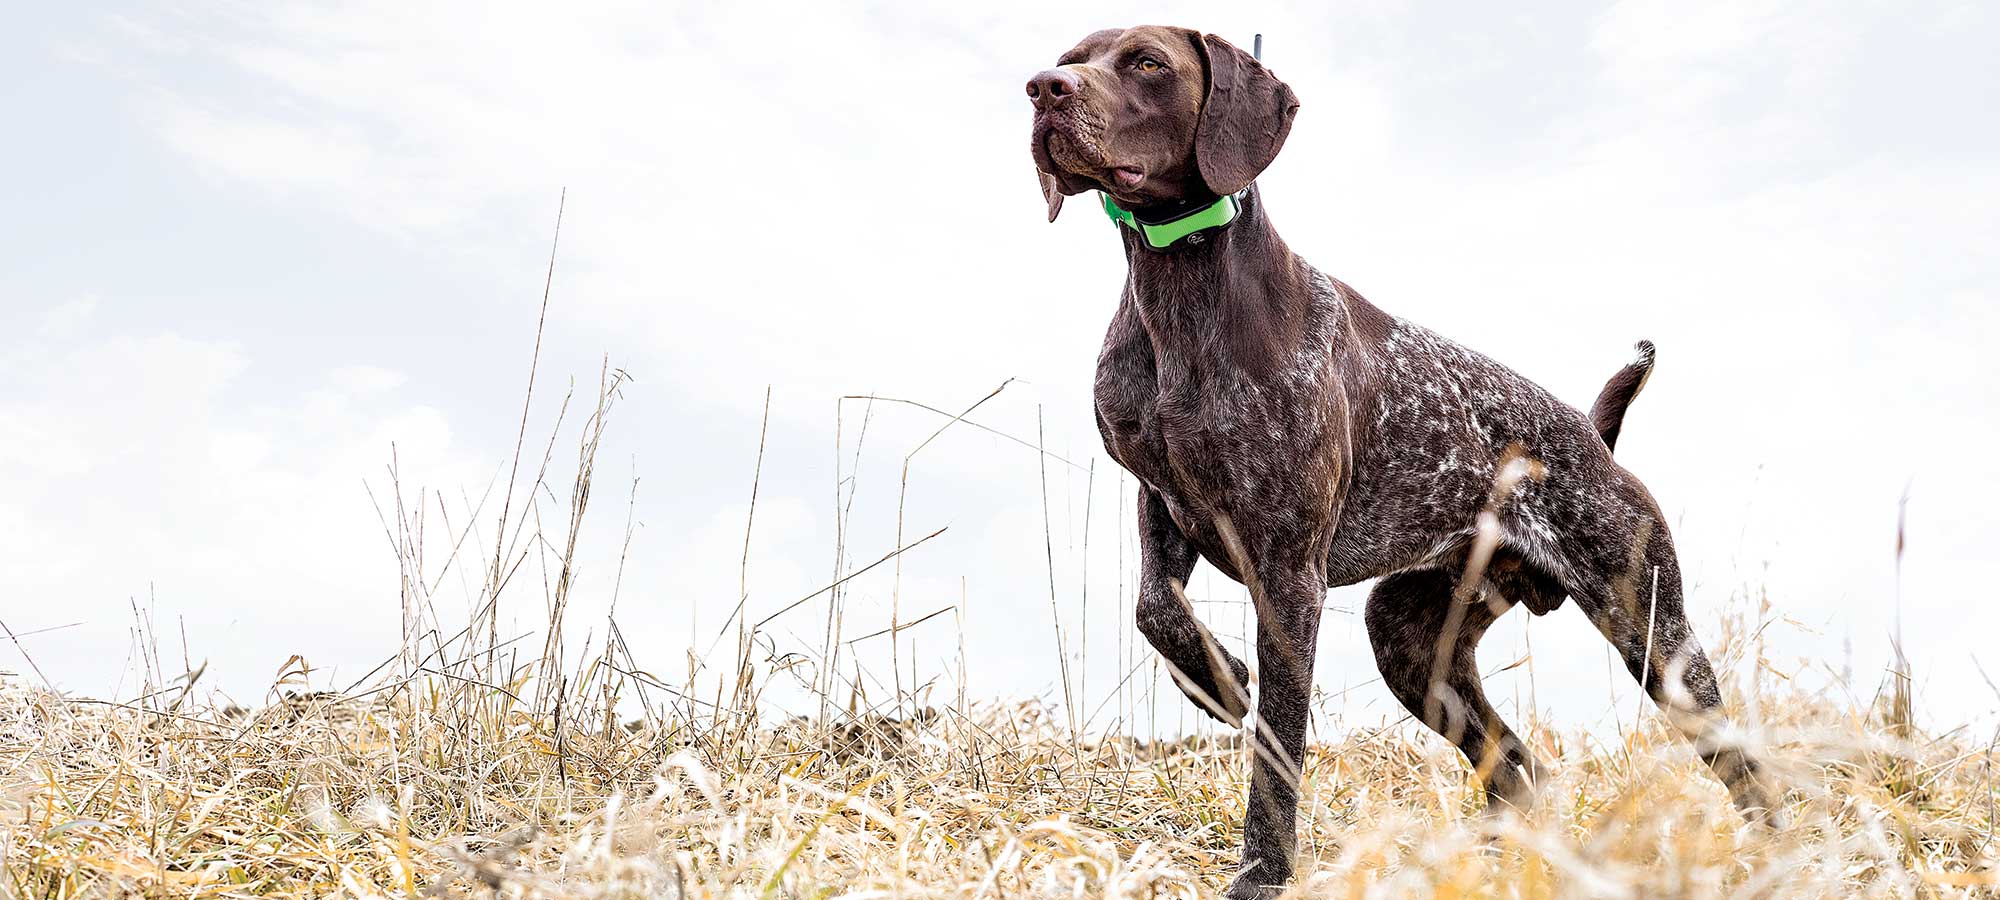 6 of the Greatest Modern Hunting Dog Stories